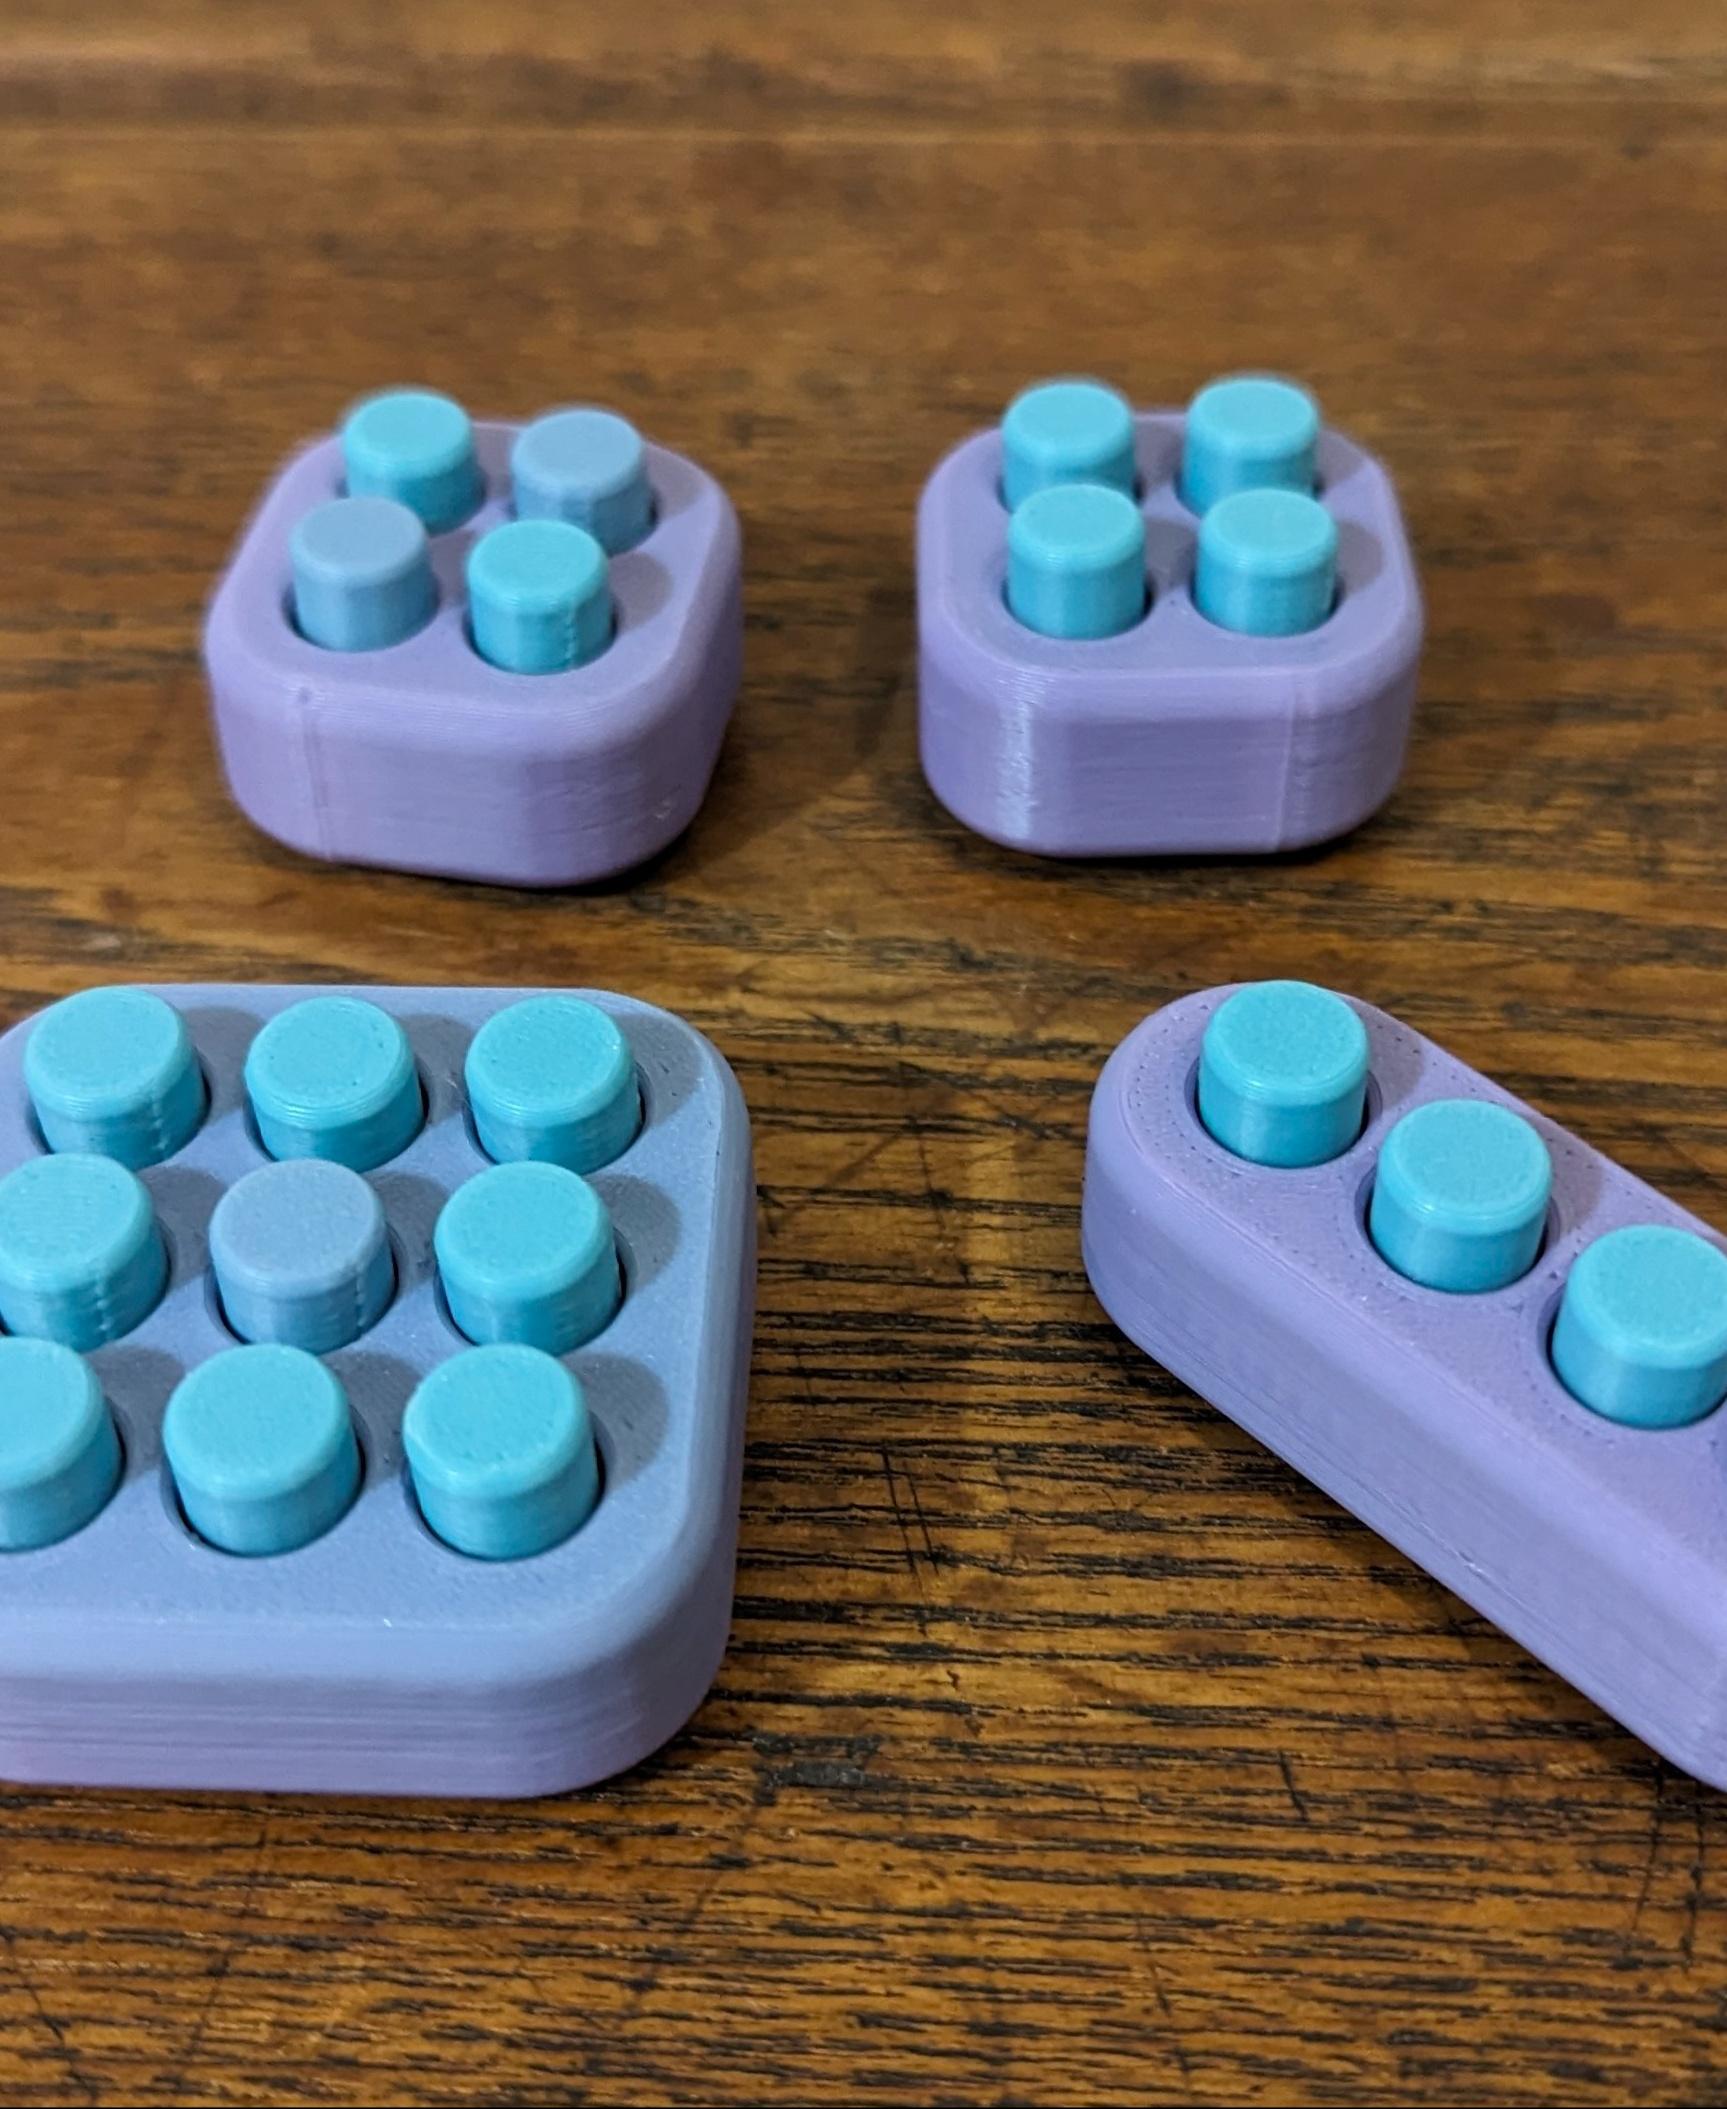 Pop Fidget (Multi-material design) - These were fun to print....once I realized I had somehow flipped one of the cases upside down.  (Can't put in the tpu gasket that way, lol)

Used @SliceWorx3D Aquarius for the cases and the buttons.

@HATCHBOX3D Digital Blue TPU 95A

https://youtube.com/shorts/oOTHZYqV7ug?si=ZDFCgWfSwW28kseB - 3d model